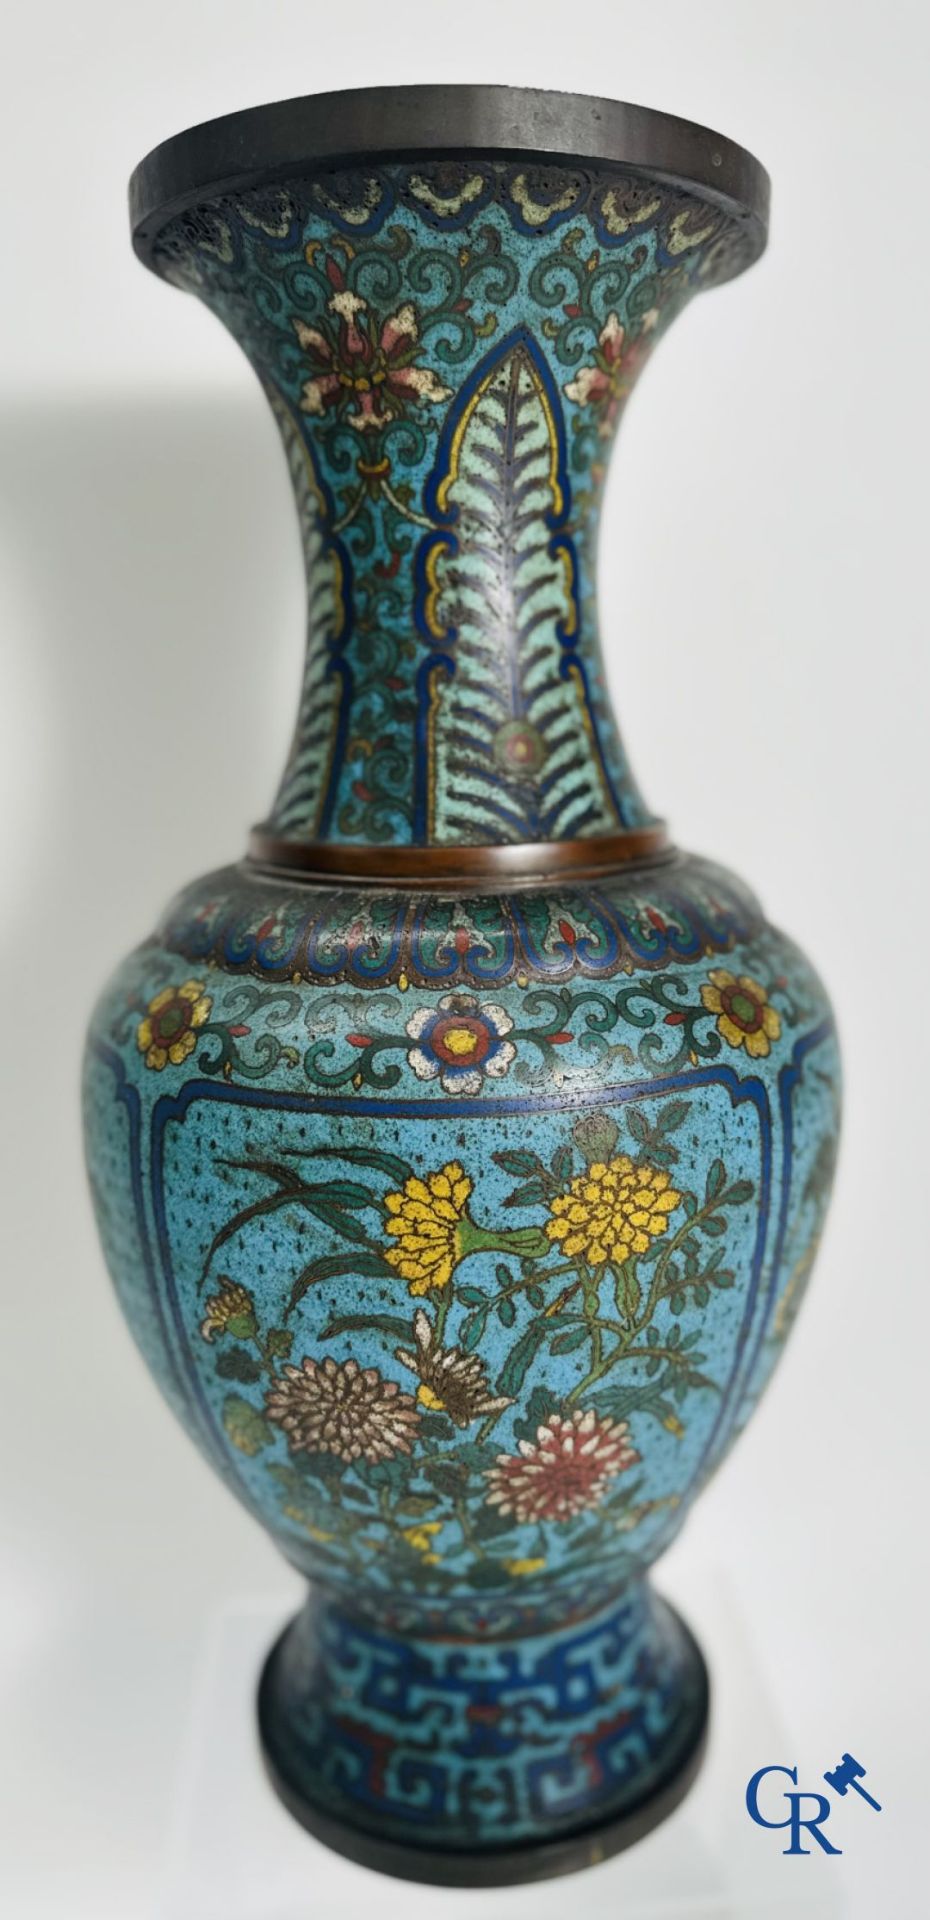 Chinese baluster-shaped vase in bronze and cloisonné. 19th century. - Image 4 of 9